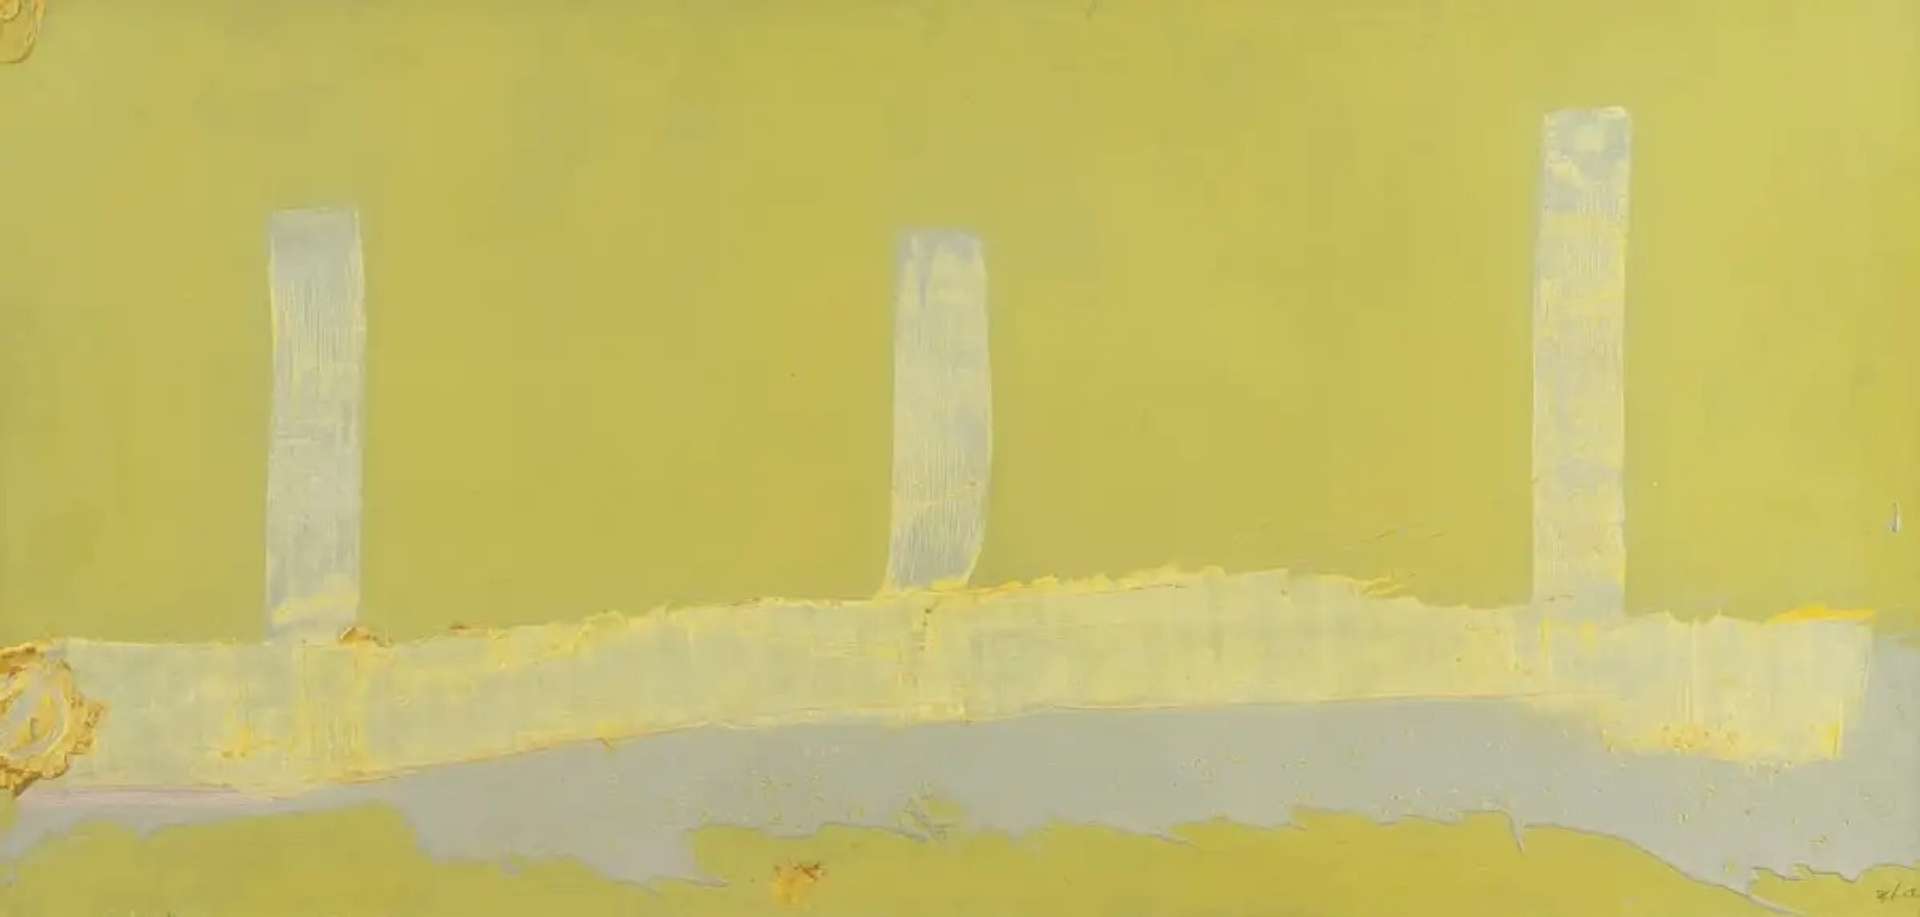 Helen Frankenthaler’s Hermes. An abstract expressionist relief print of an abstract yellow landscape. 